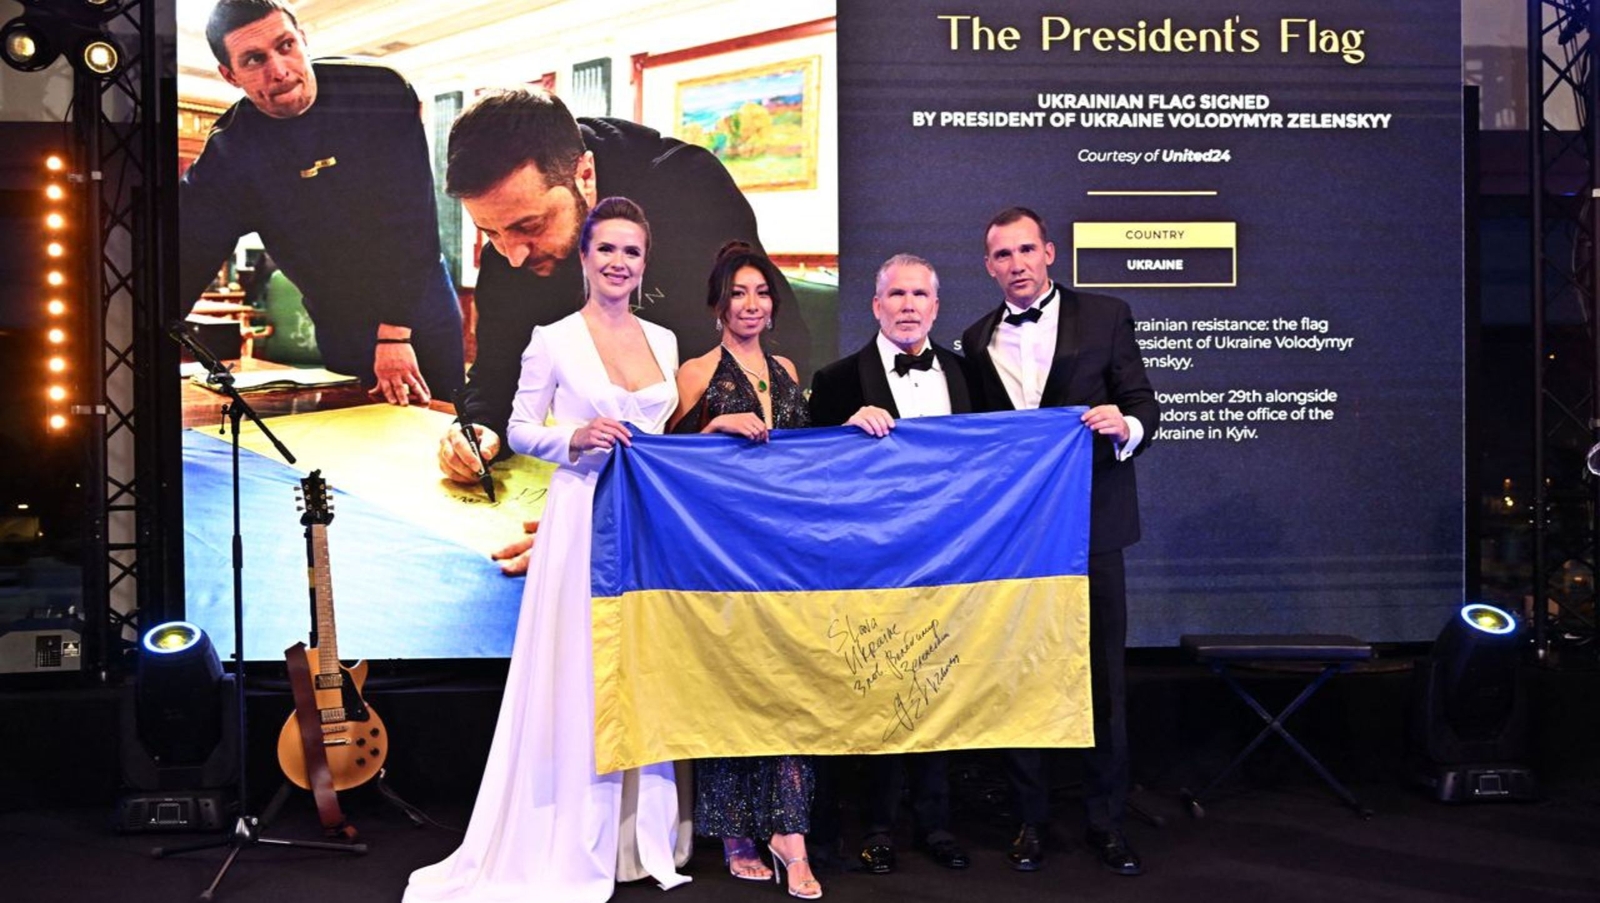 The Annual Charity Evening Held by the Elina Svitolina Foundation Helped Raised Funds in Support of Ukraine